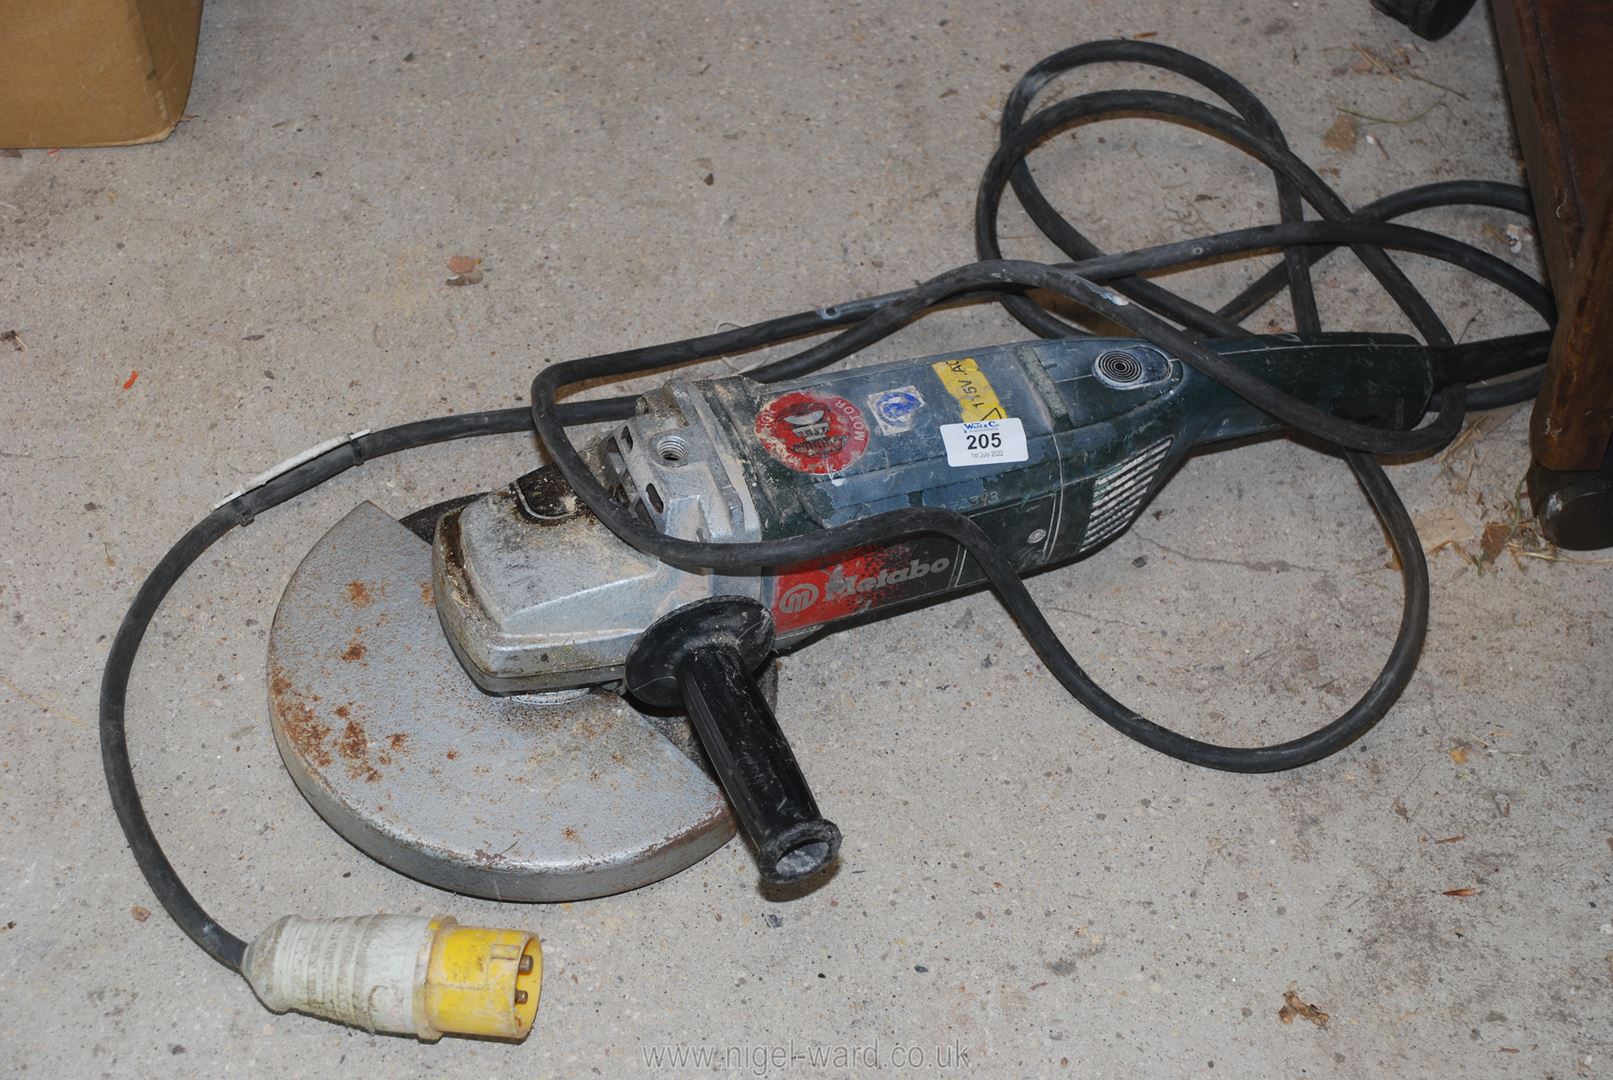 Metabo 110v 9" Angle Grinder (sold as seen - faulty switch).